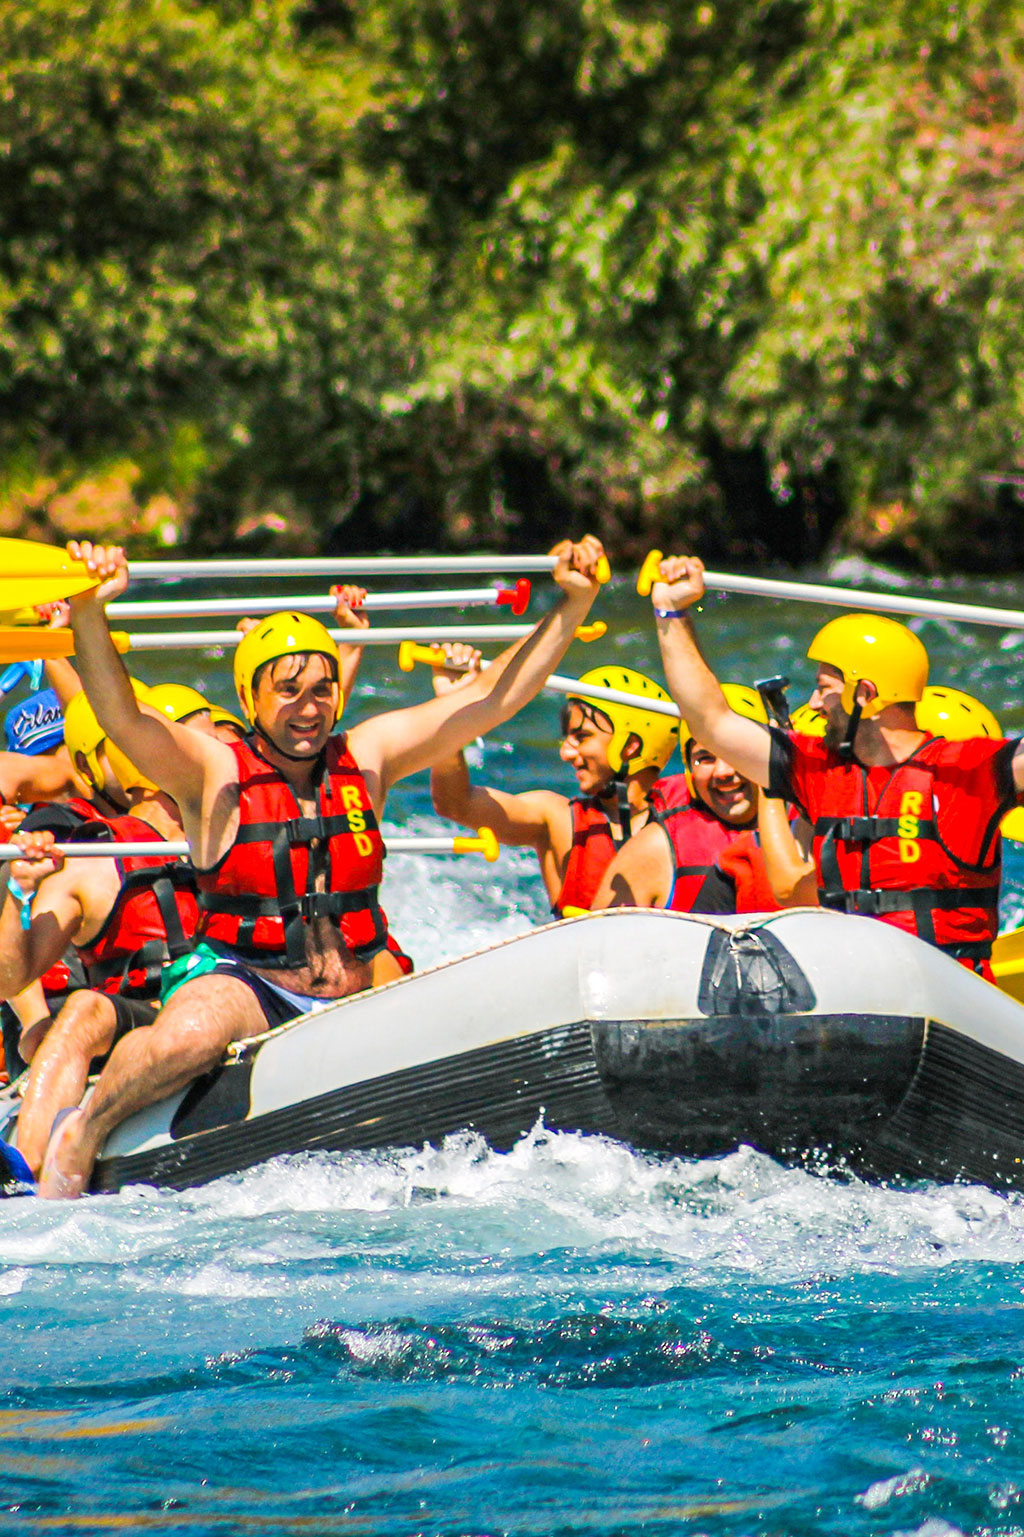 Group of young people white water rafting